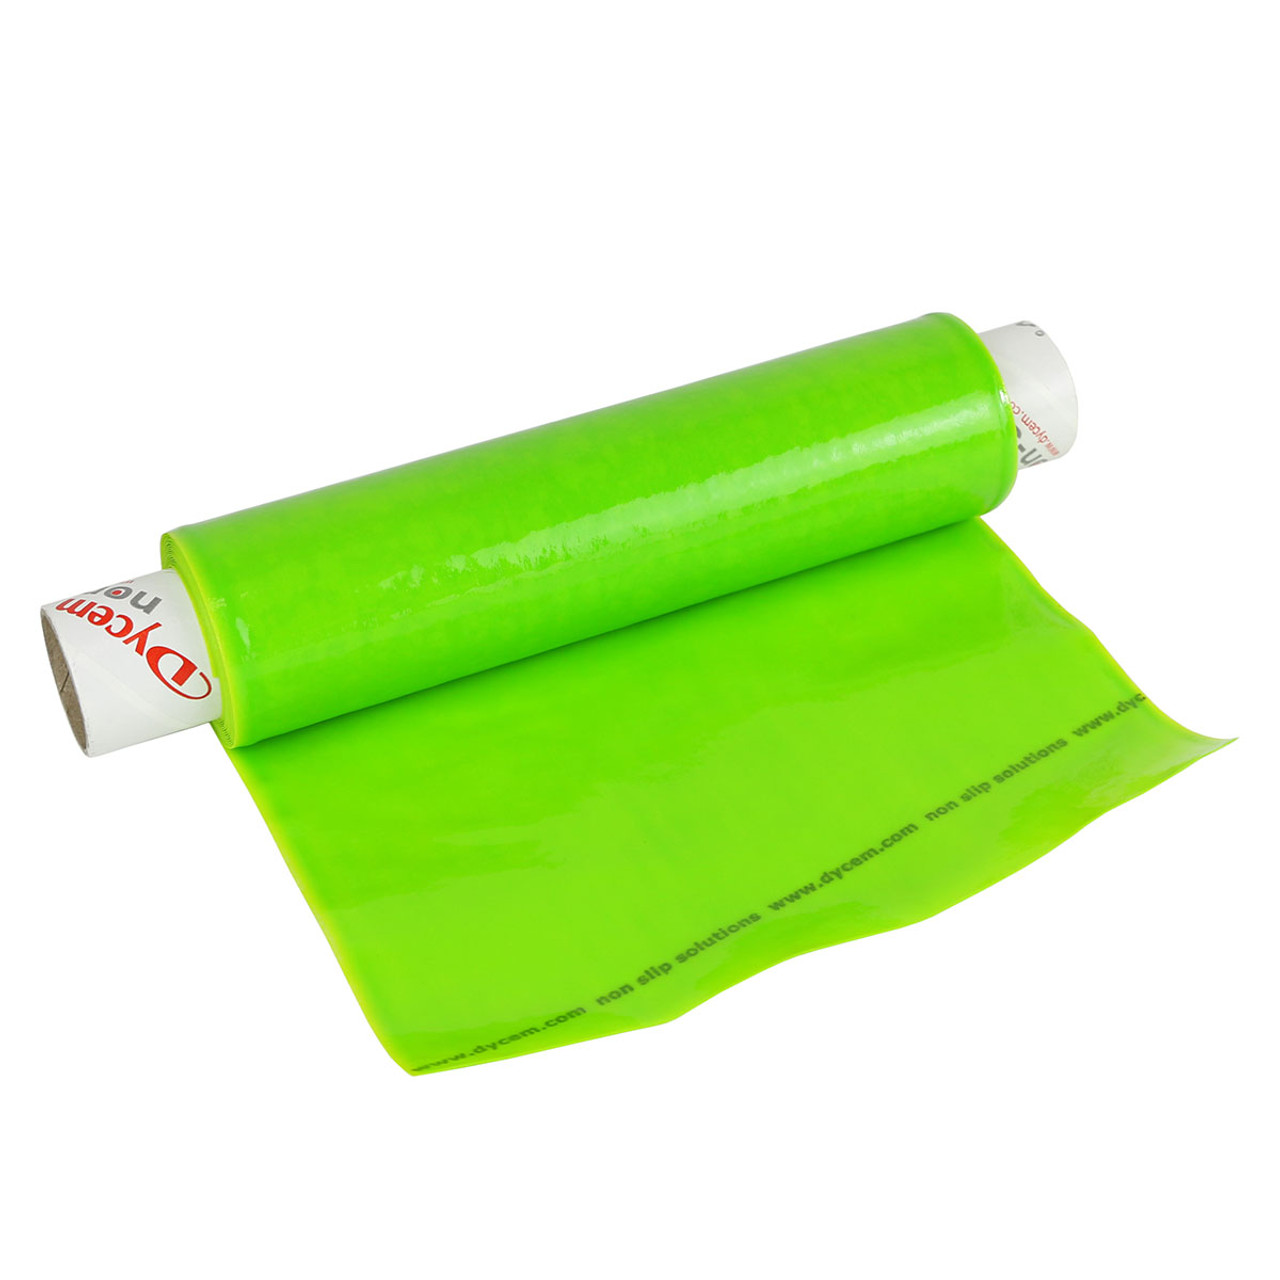 Dycem¨ non-slip material, roll, 8"x6-1/2 foot, lime